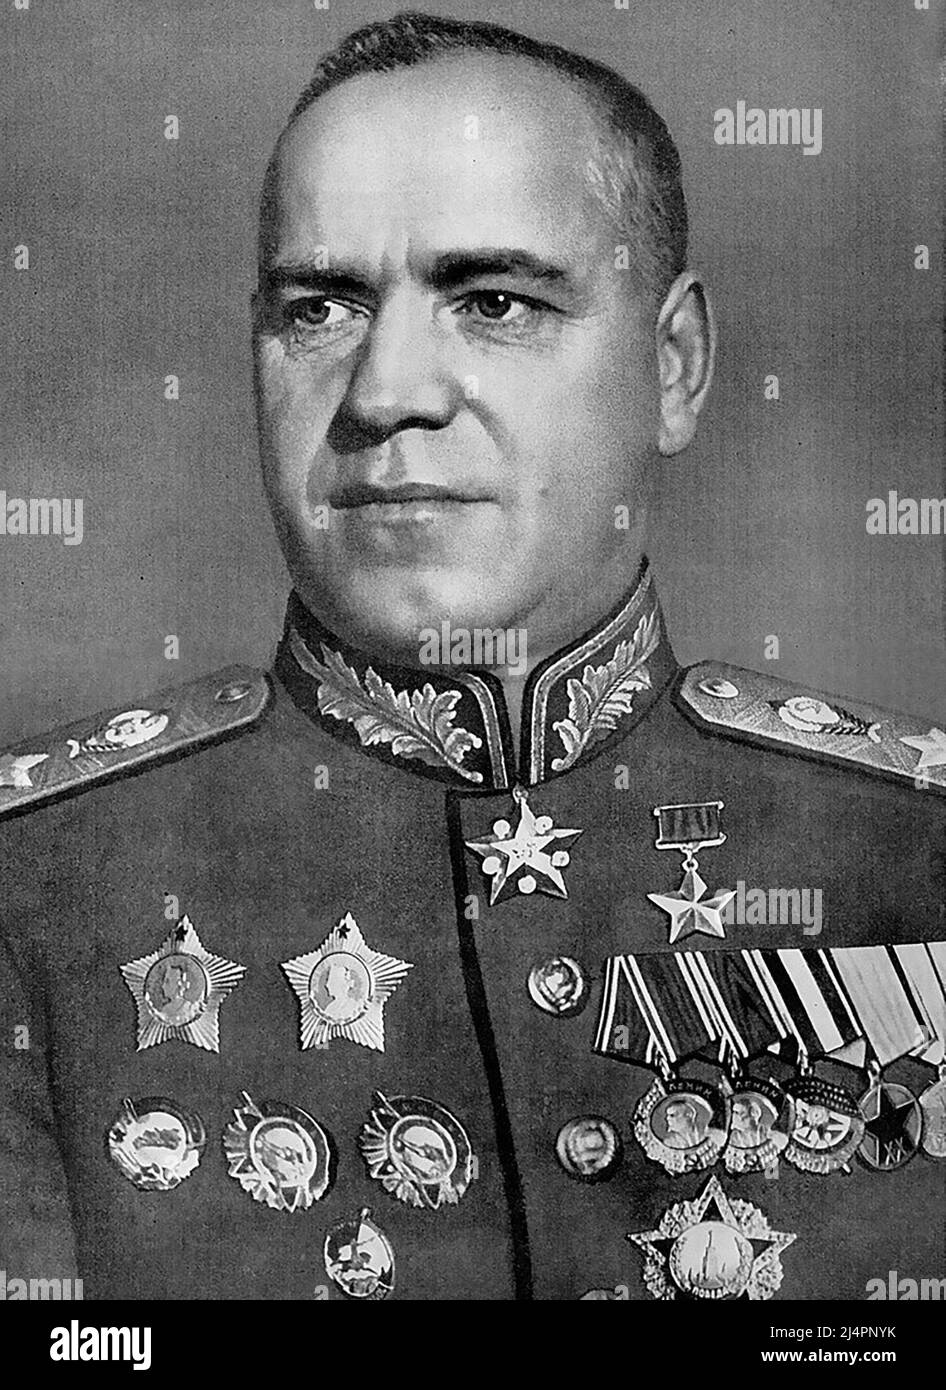 One of WW2's most formidable commanders, Georgy Zhukov from the Red Army Stock Photo